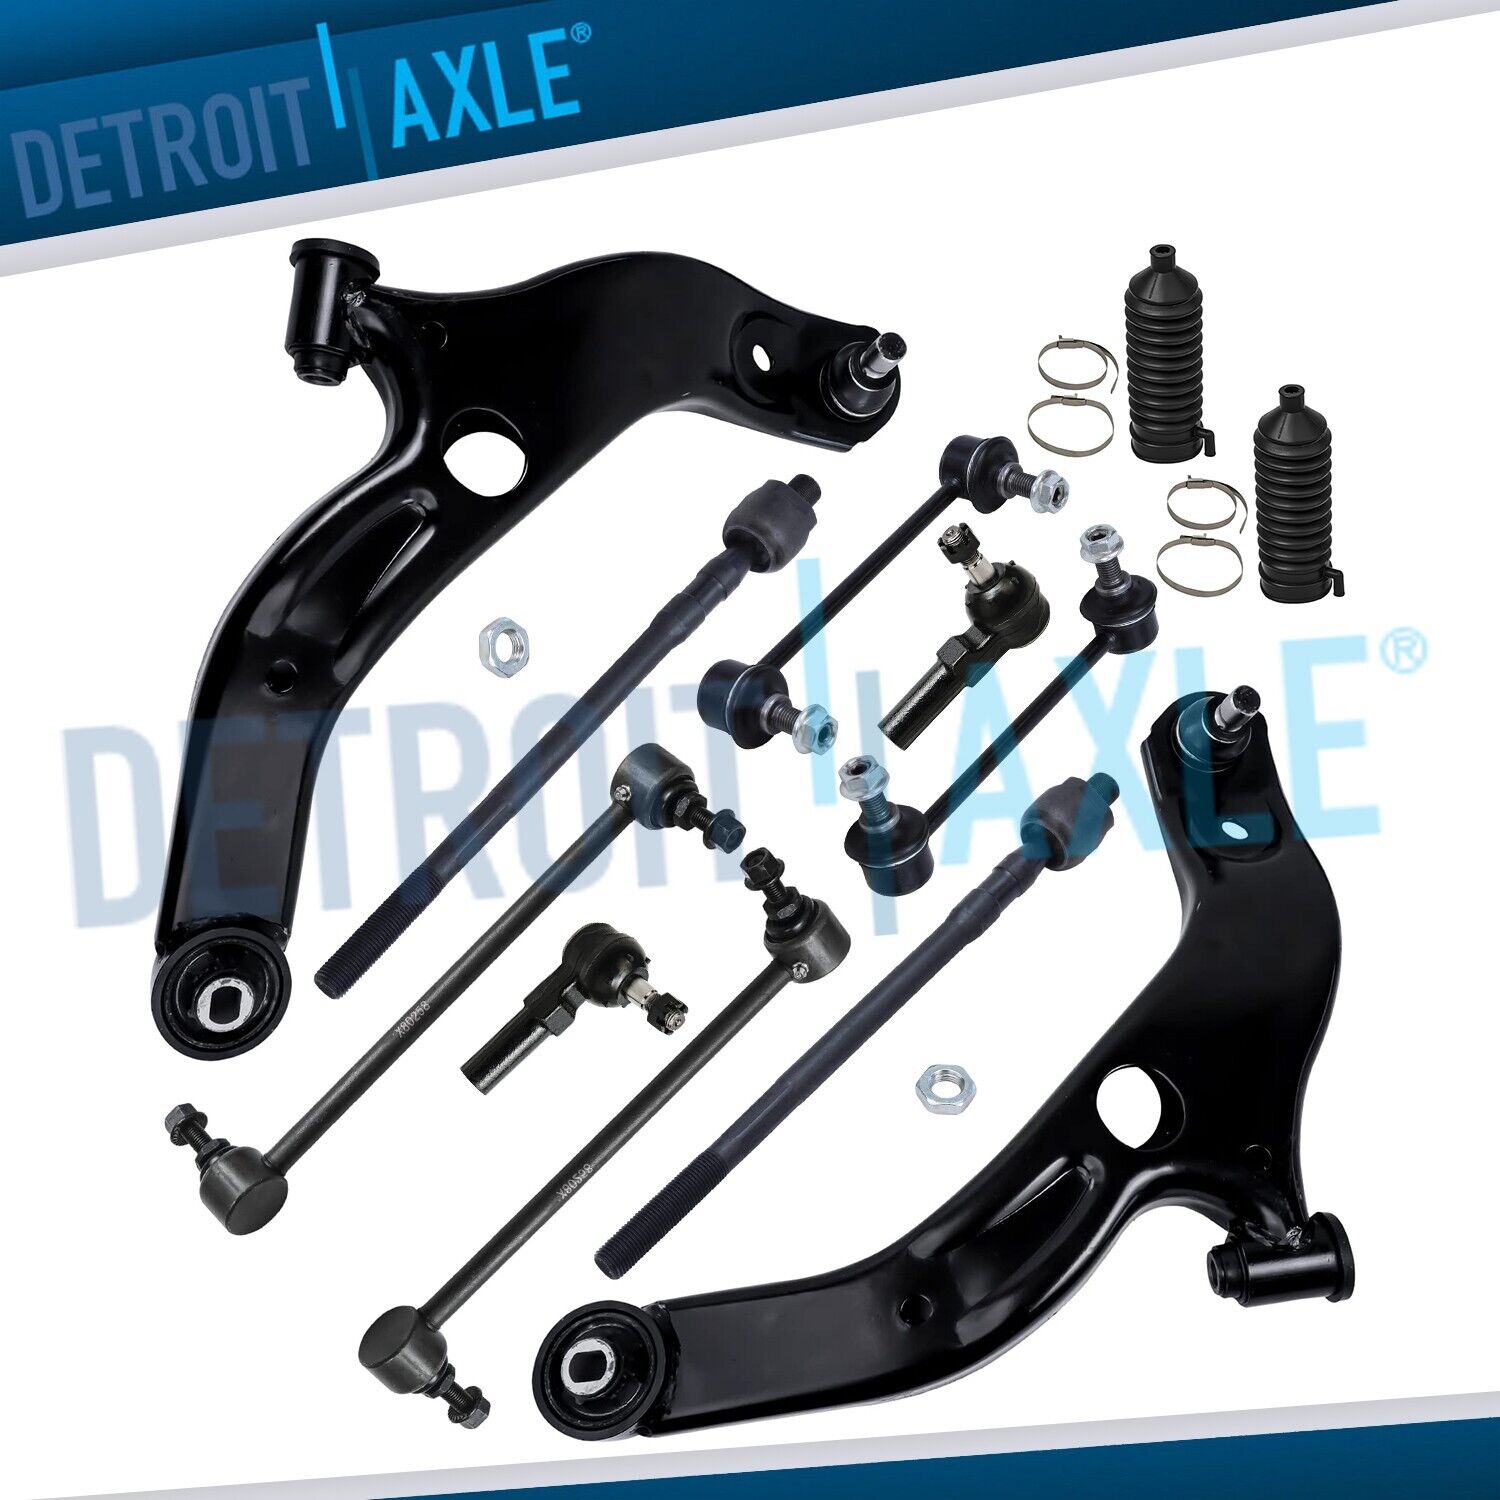 New 12pc Front Lower Control Arms & Suspension Kit for 2002 2003 Mazda Protege 5